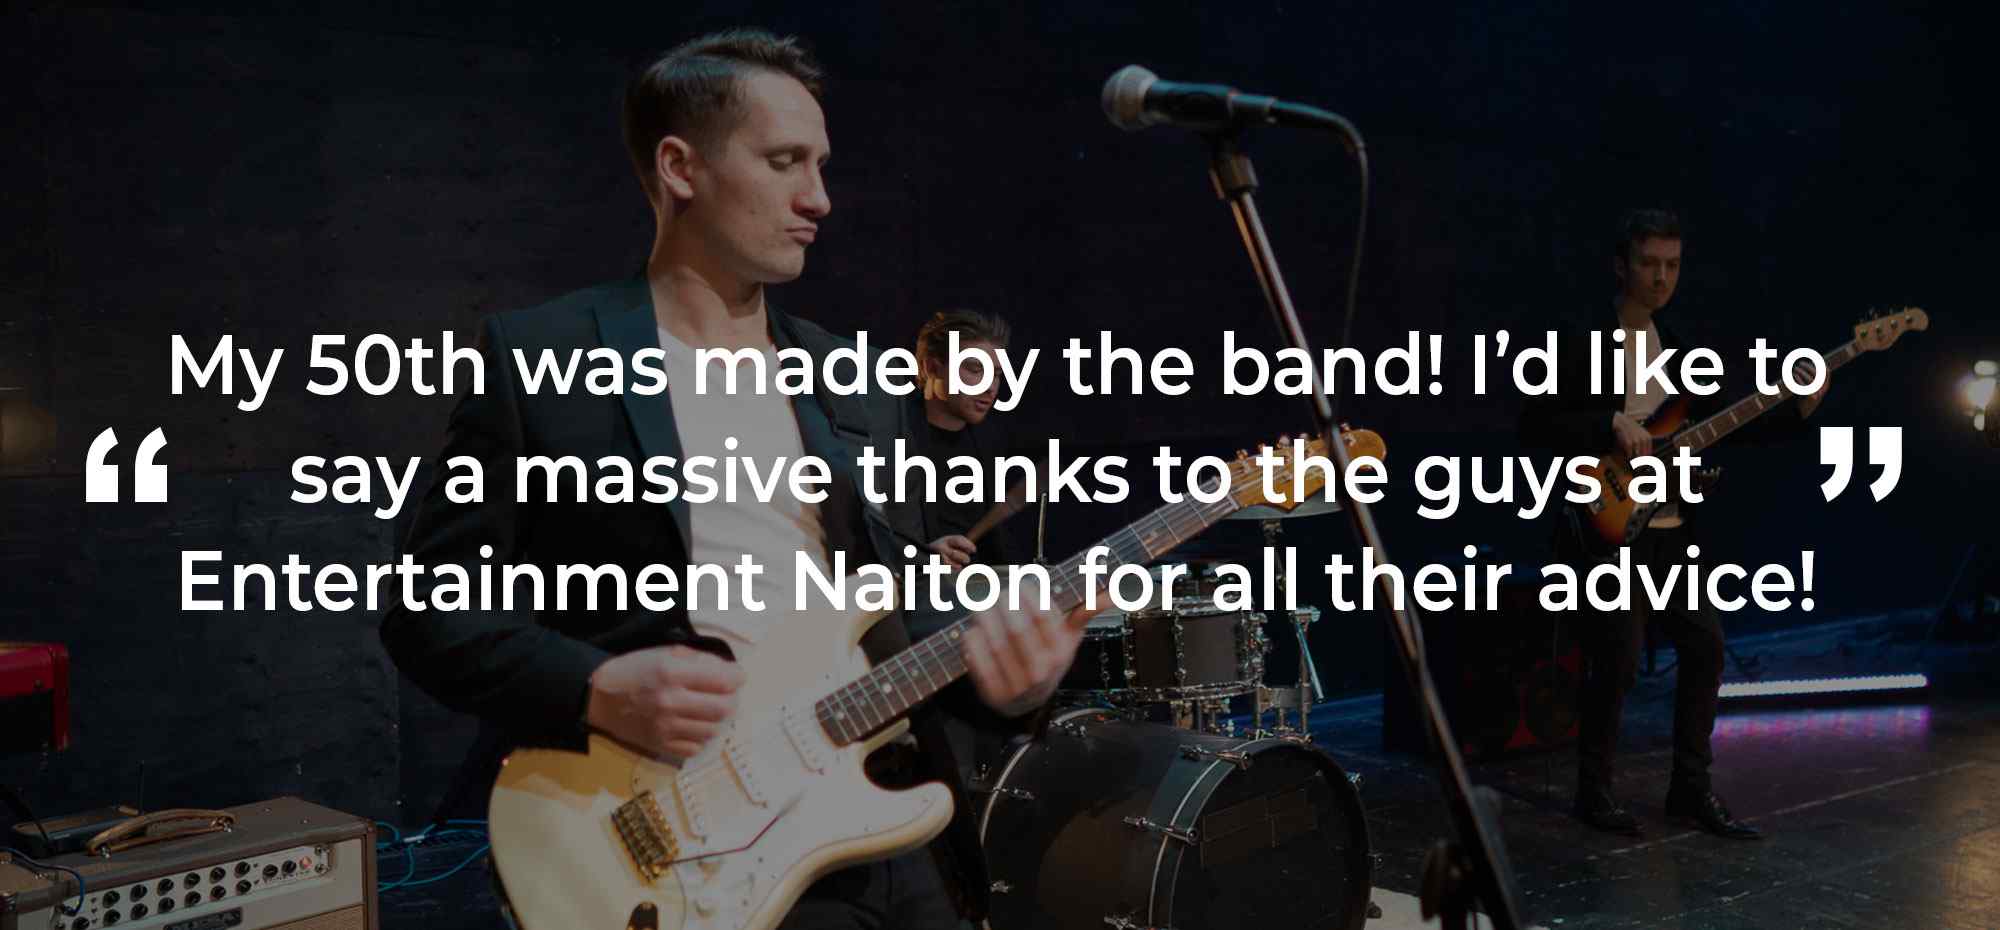 Client Review of a Party Band Warwickshire